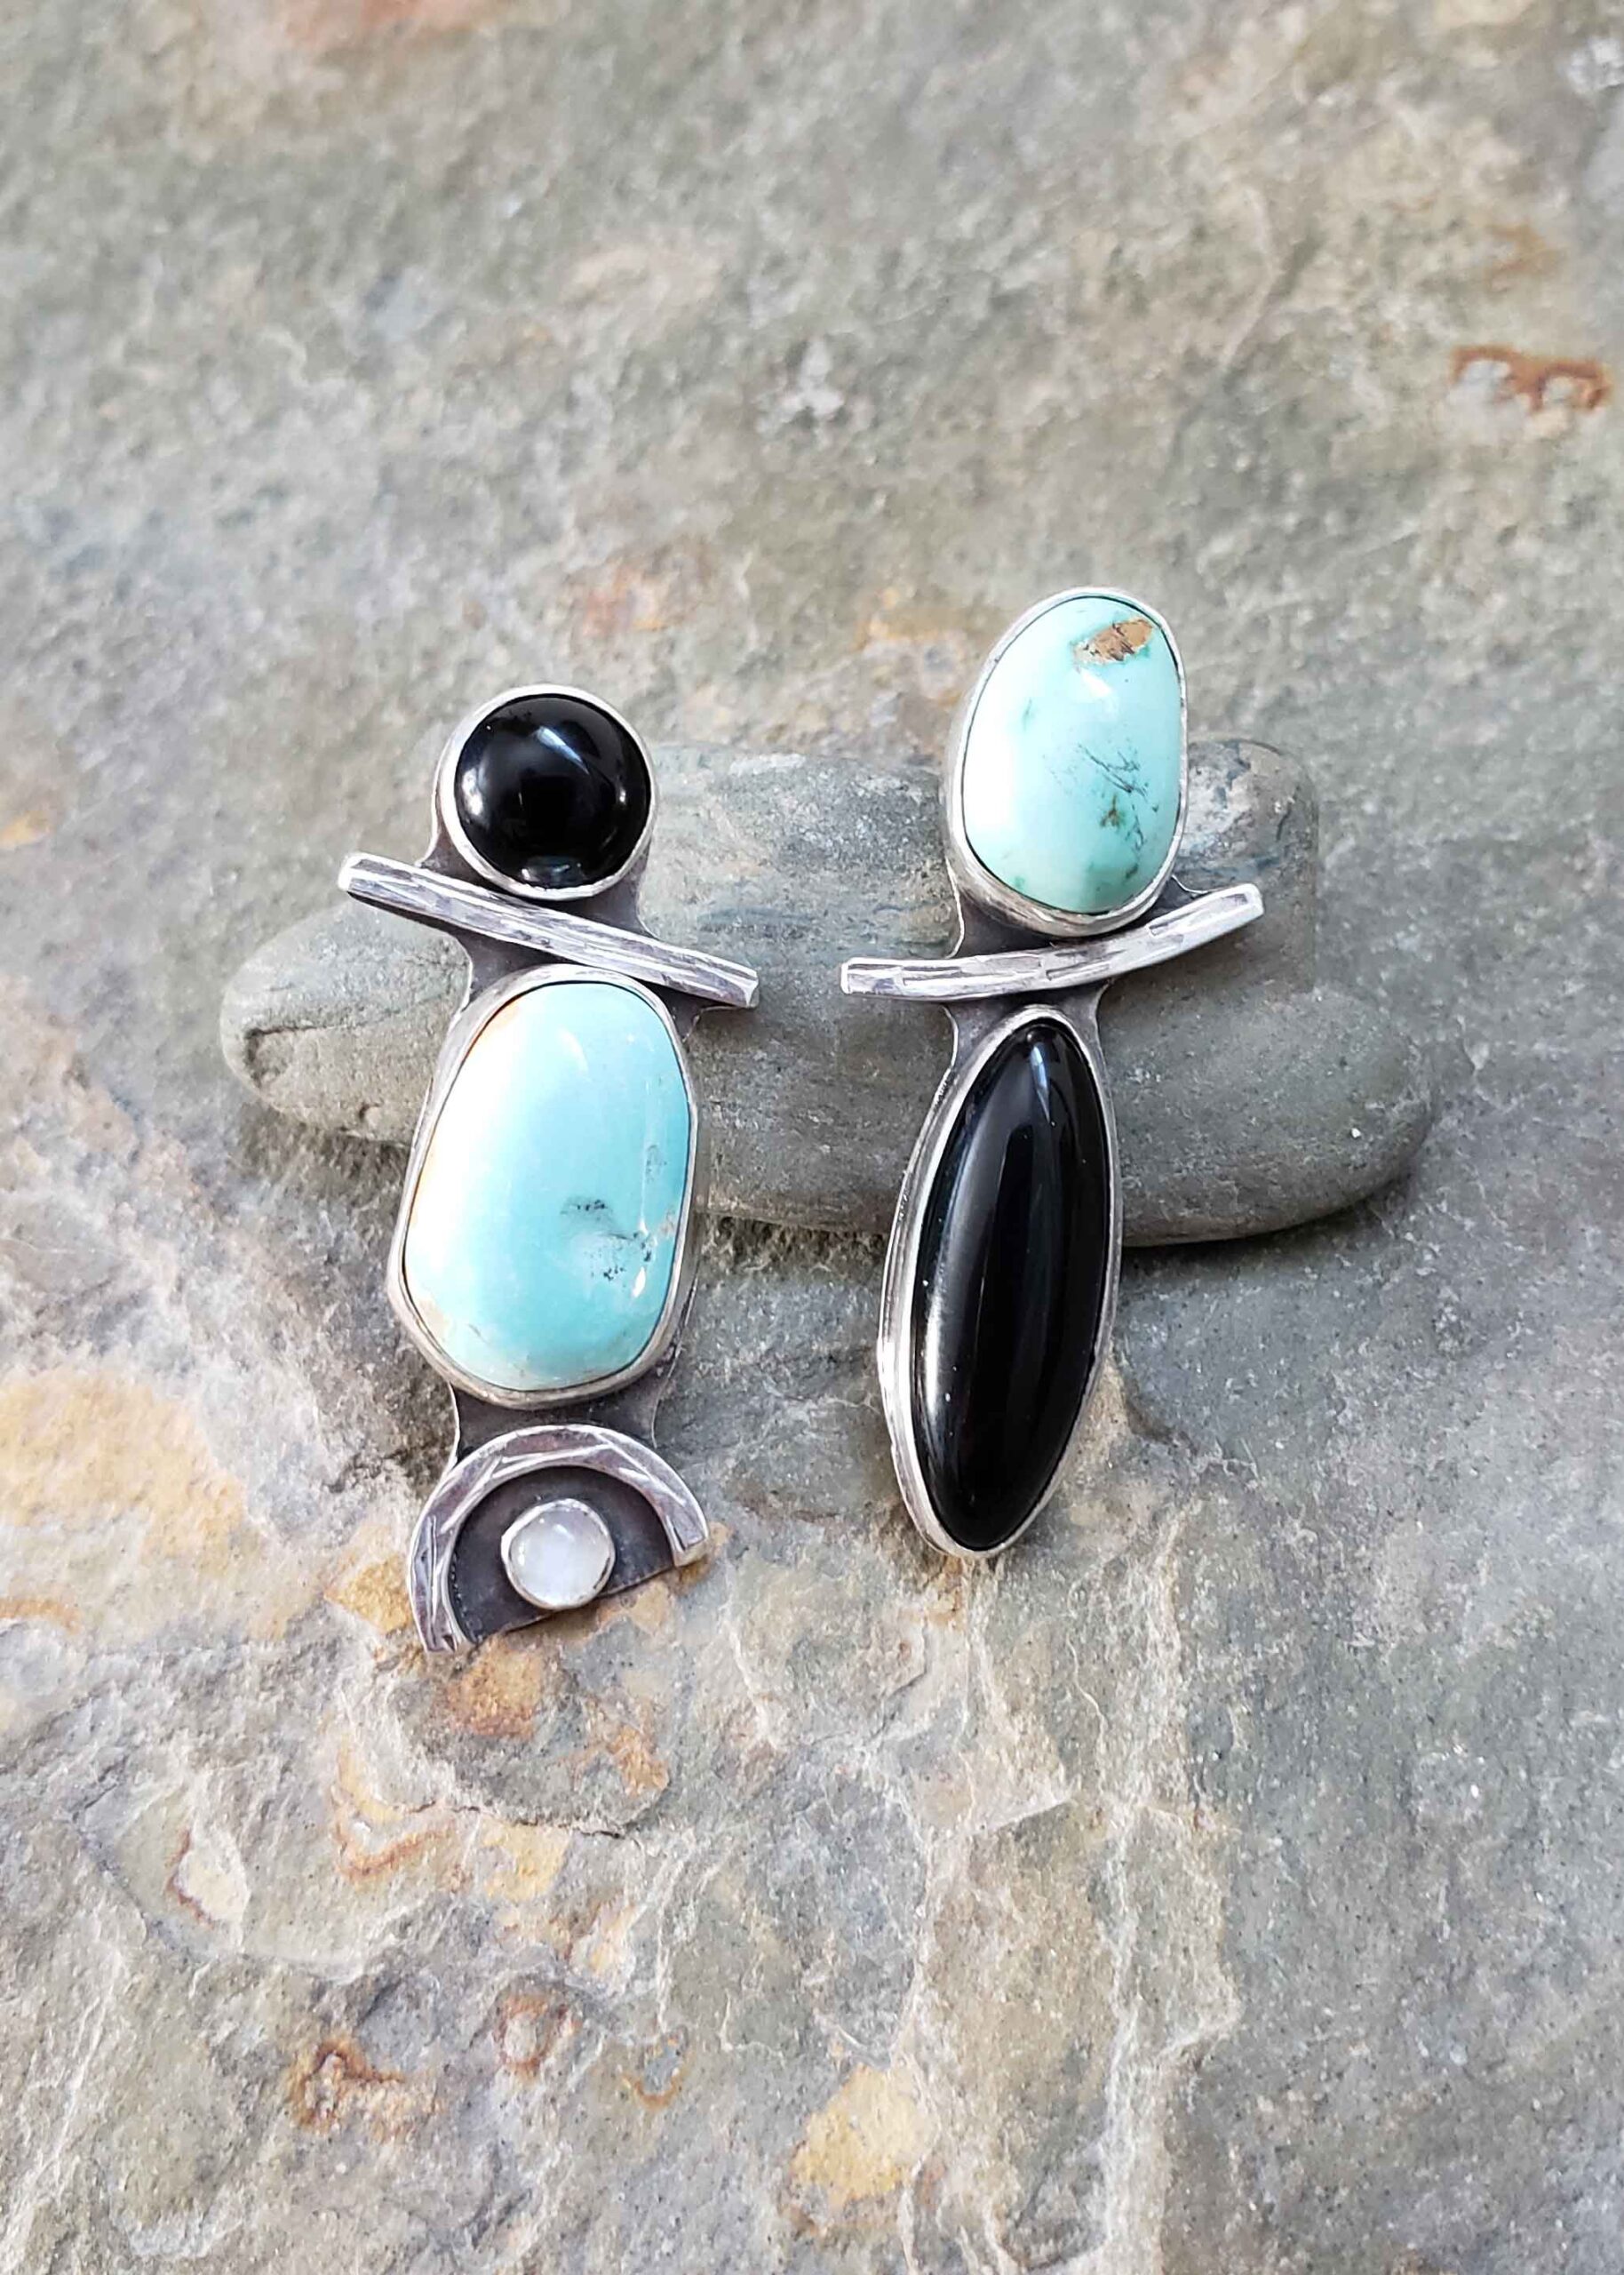 Turquoise, black and white silver asymmetrical post earrings by Dona Miller.